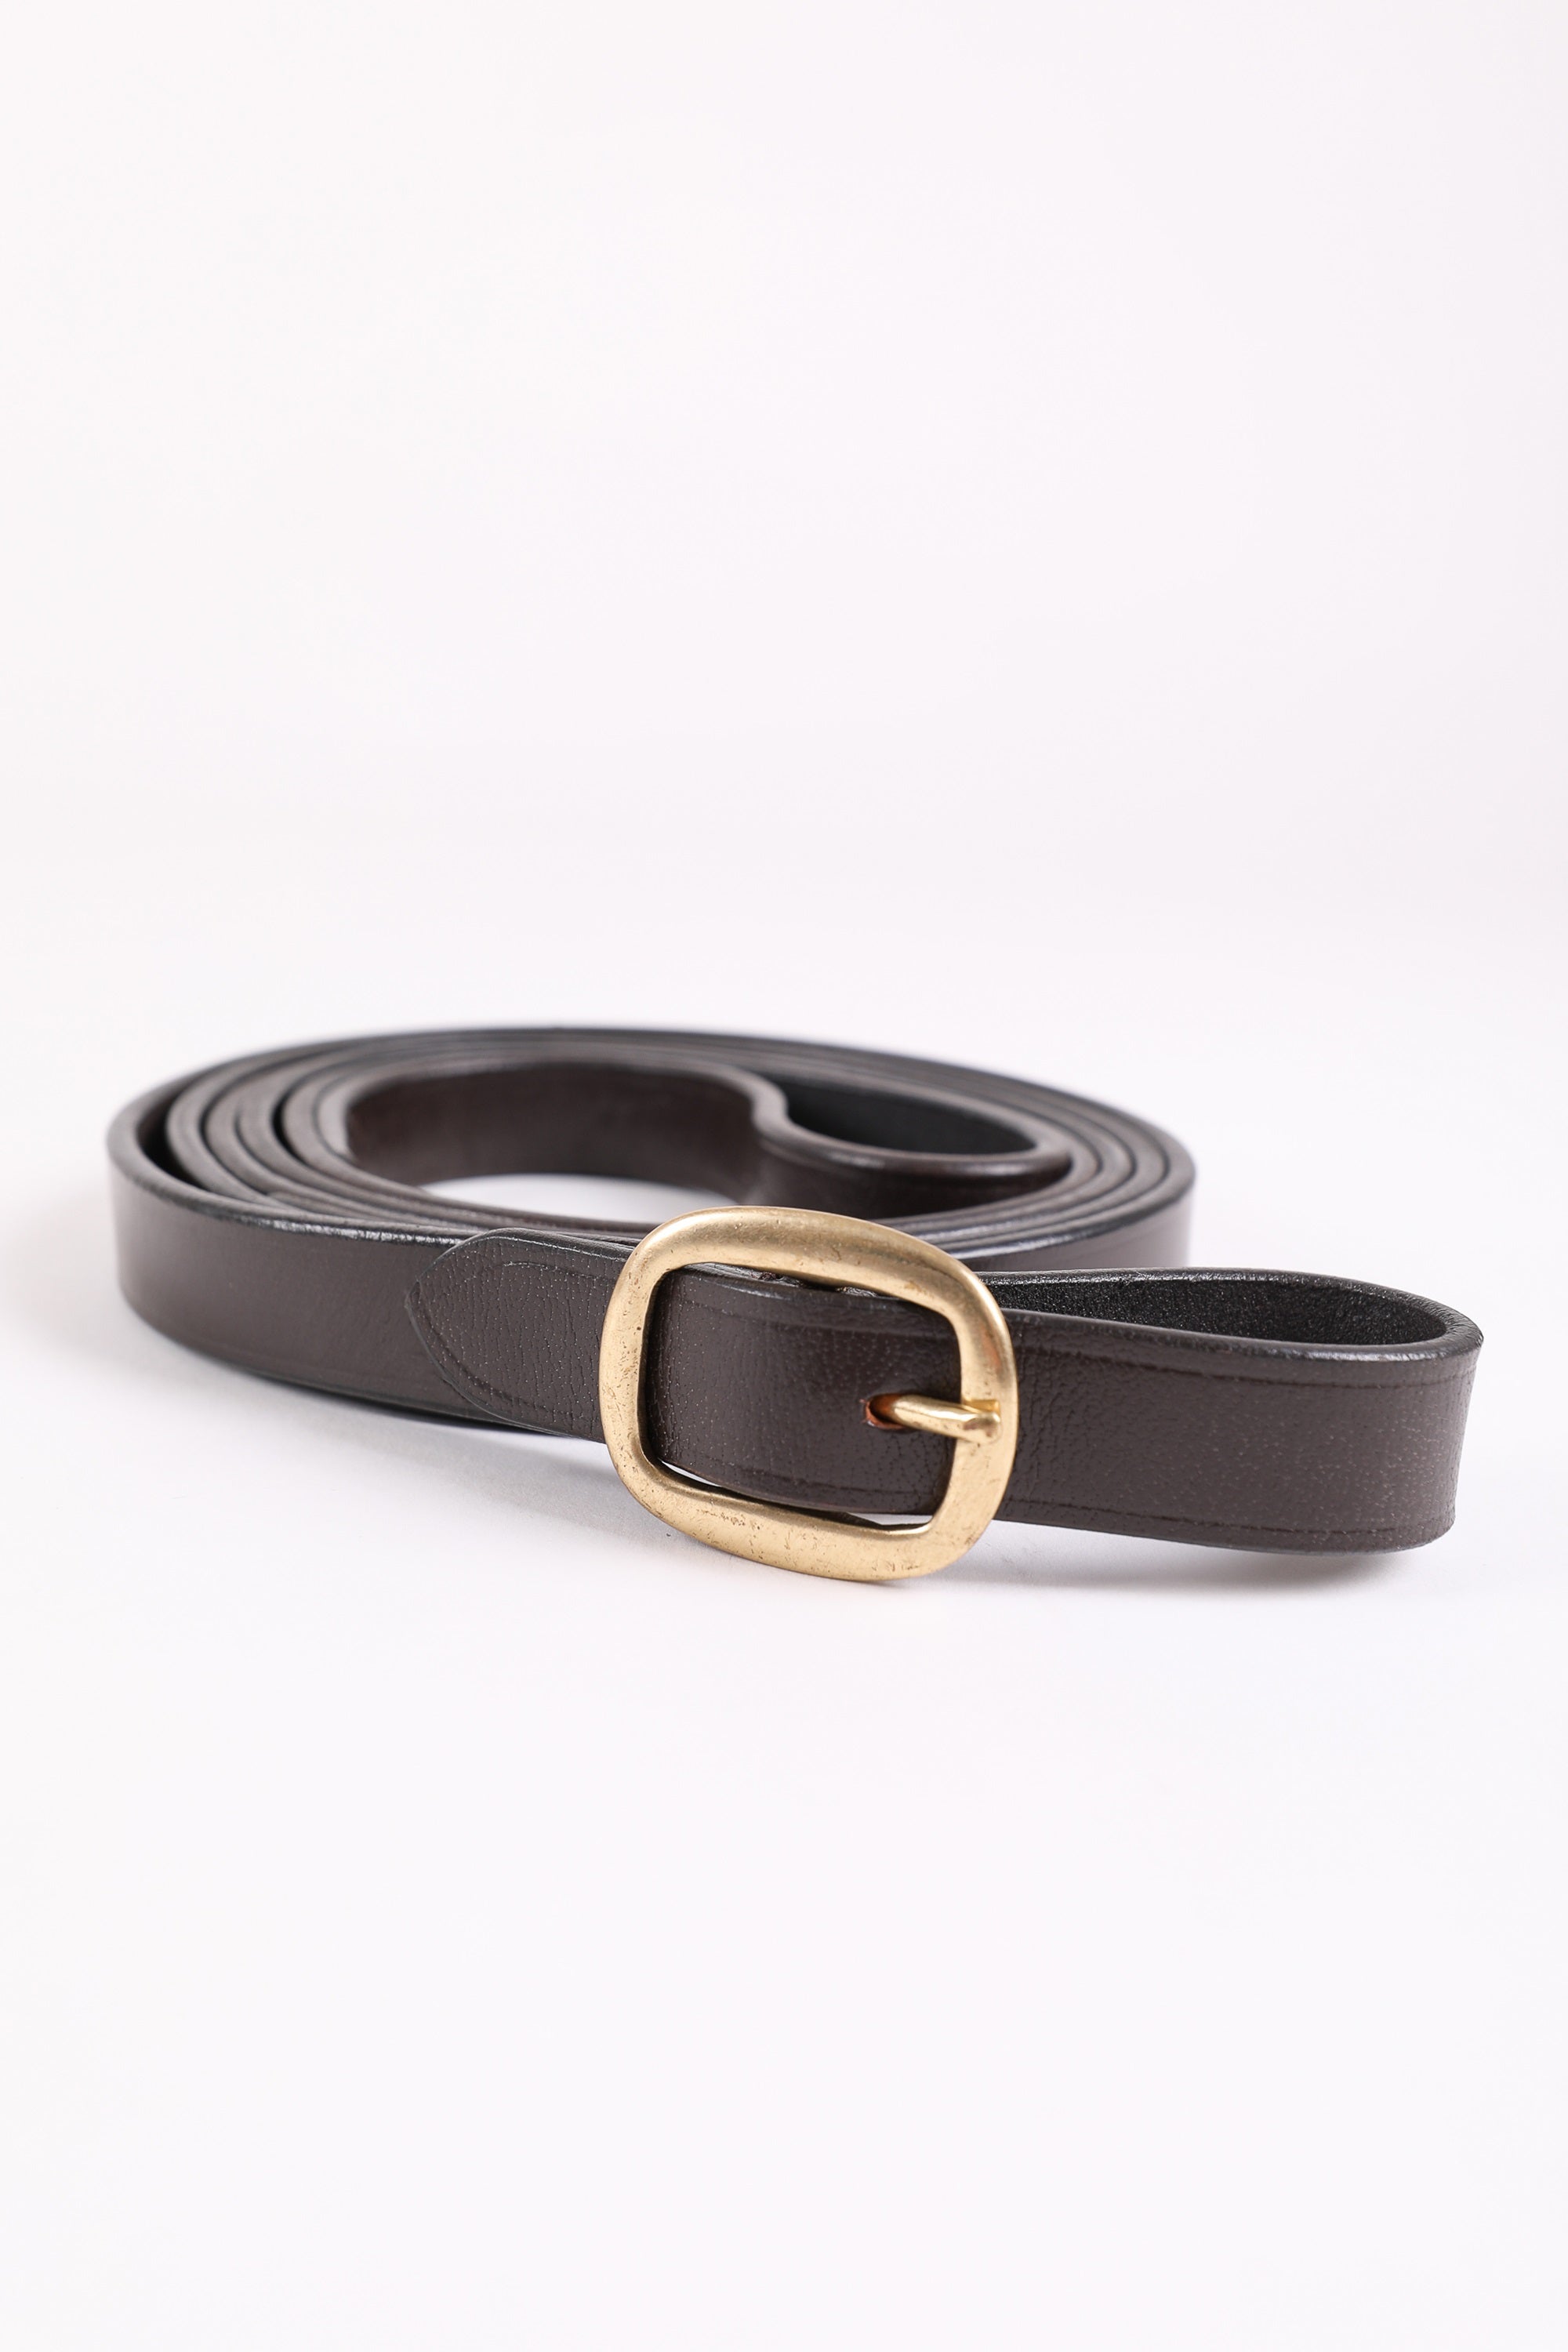 Breeze Up Leather Lead - Brown